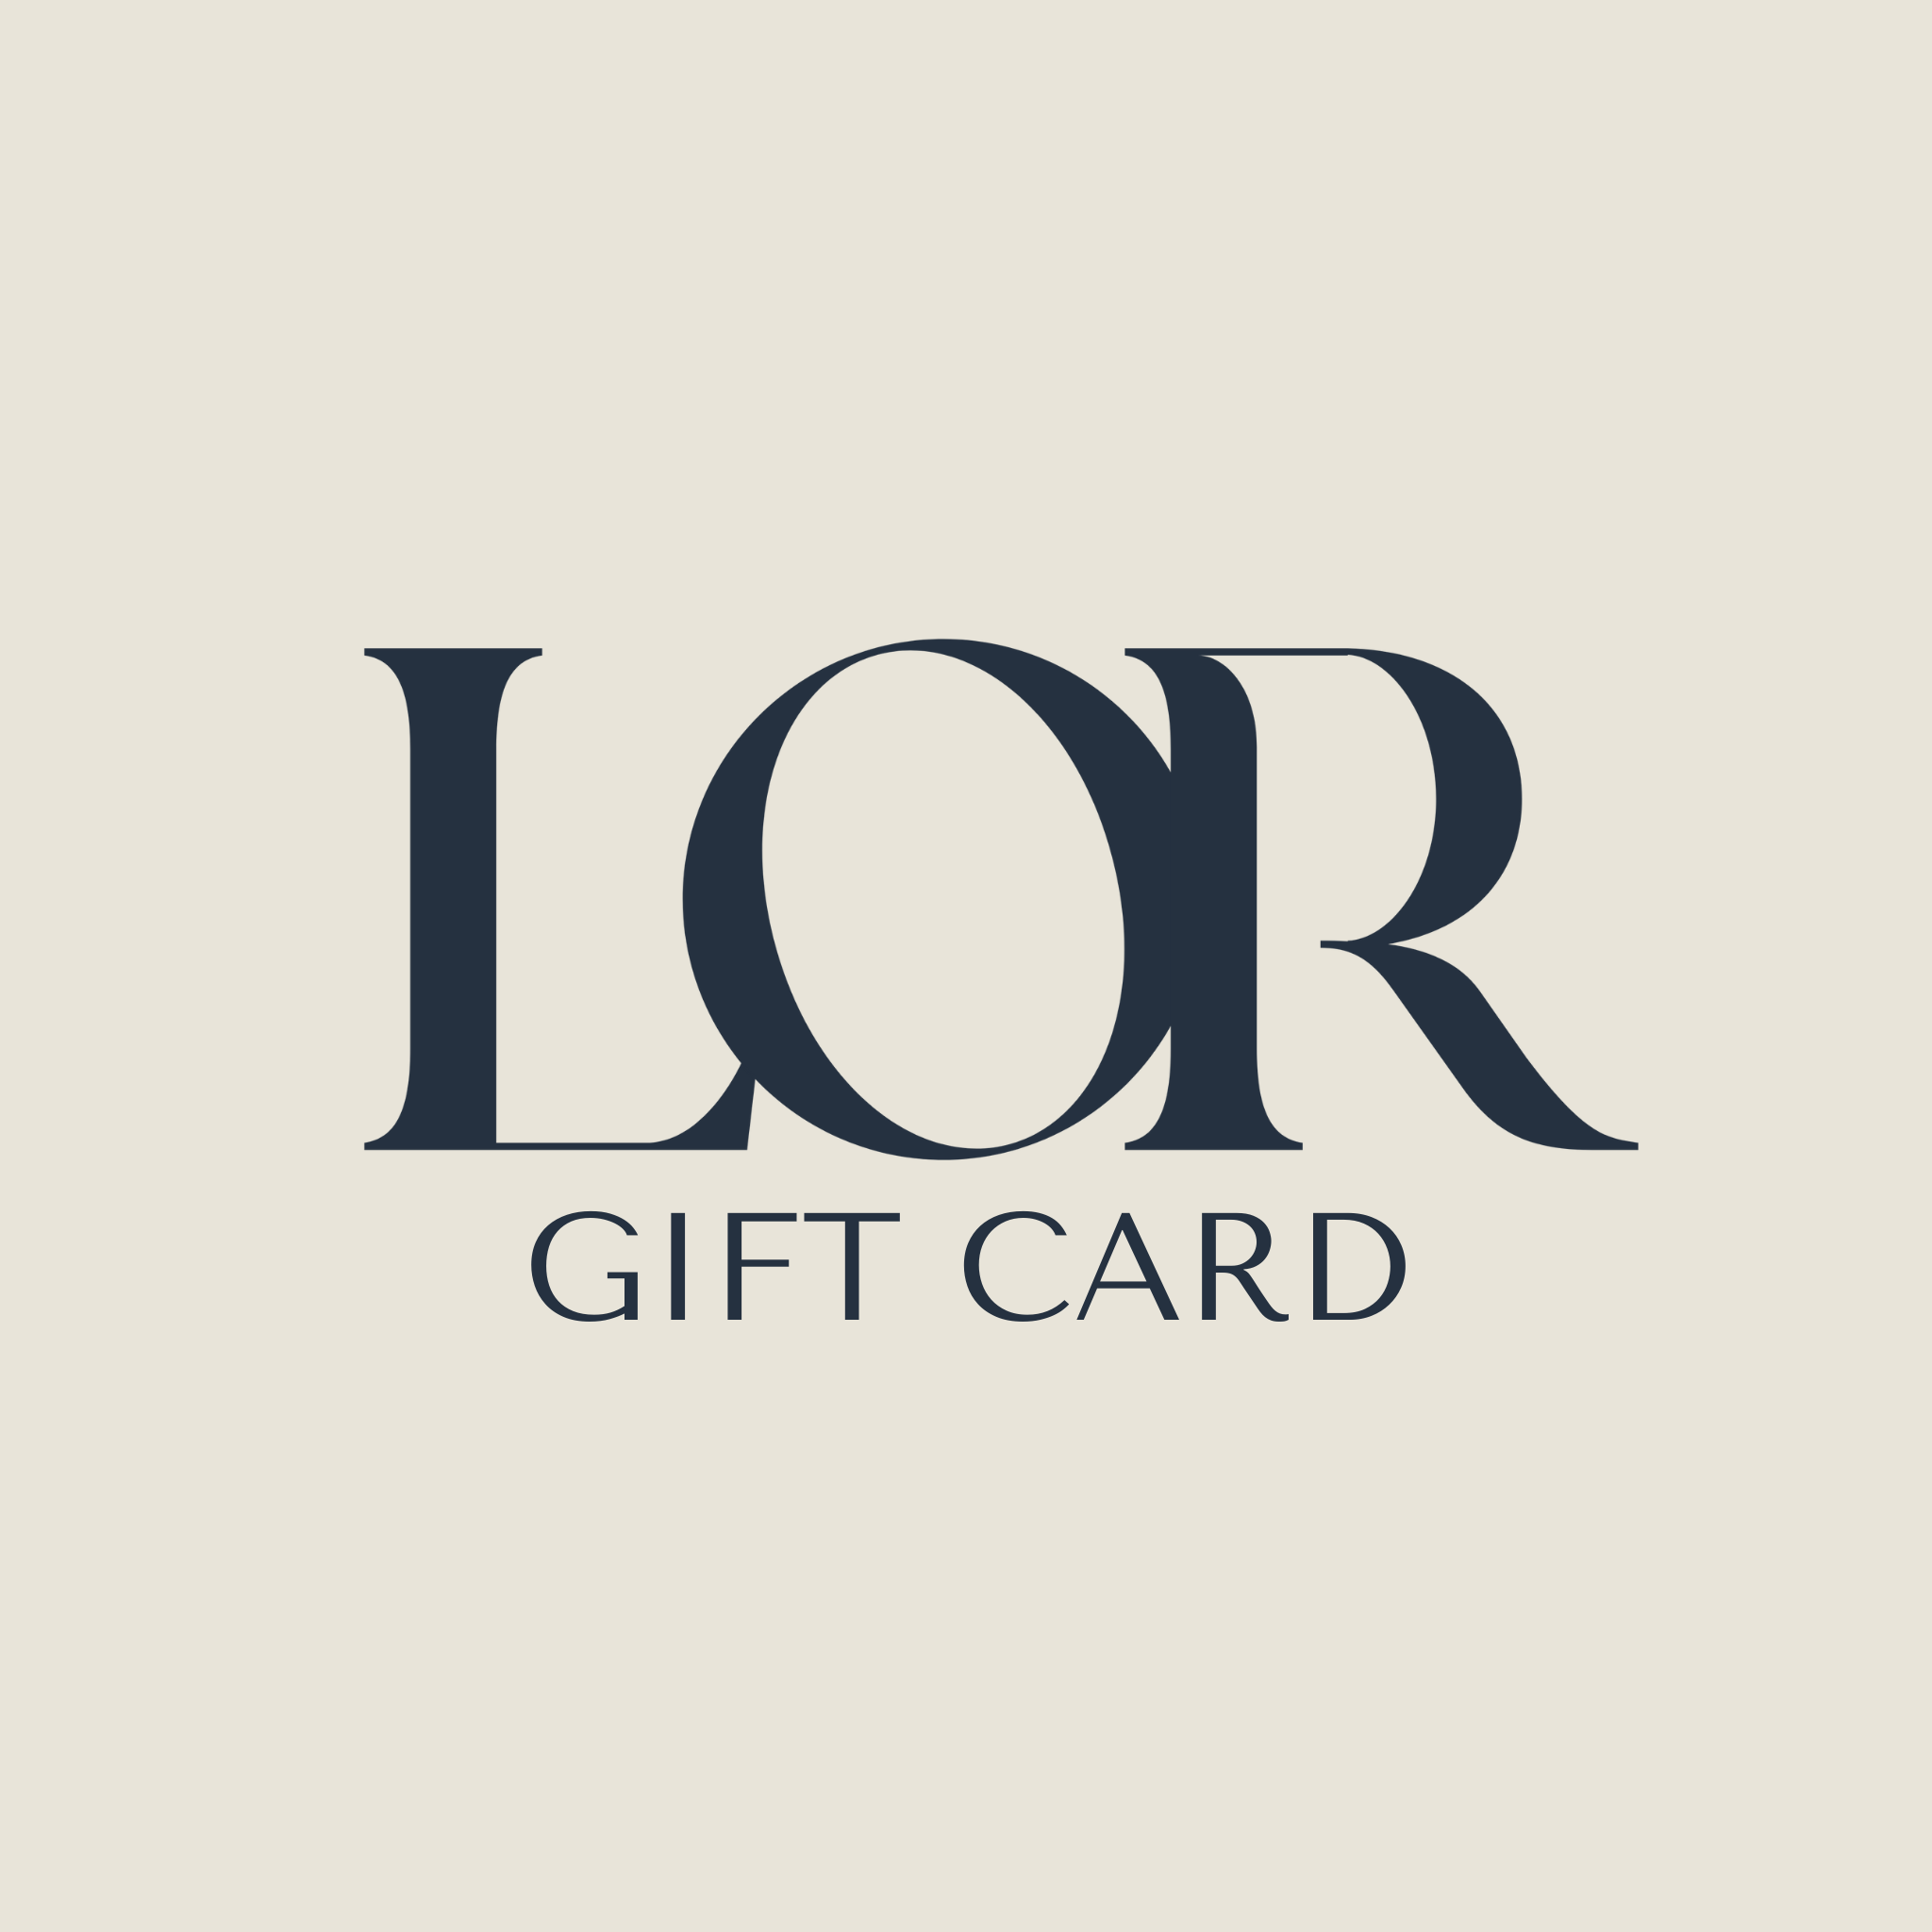 LOR Gift Card